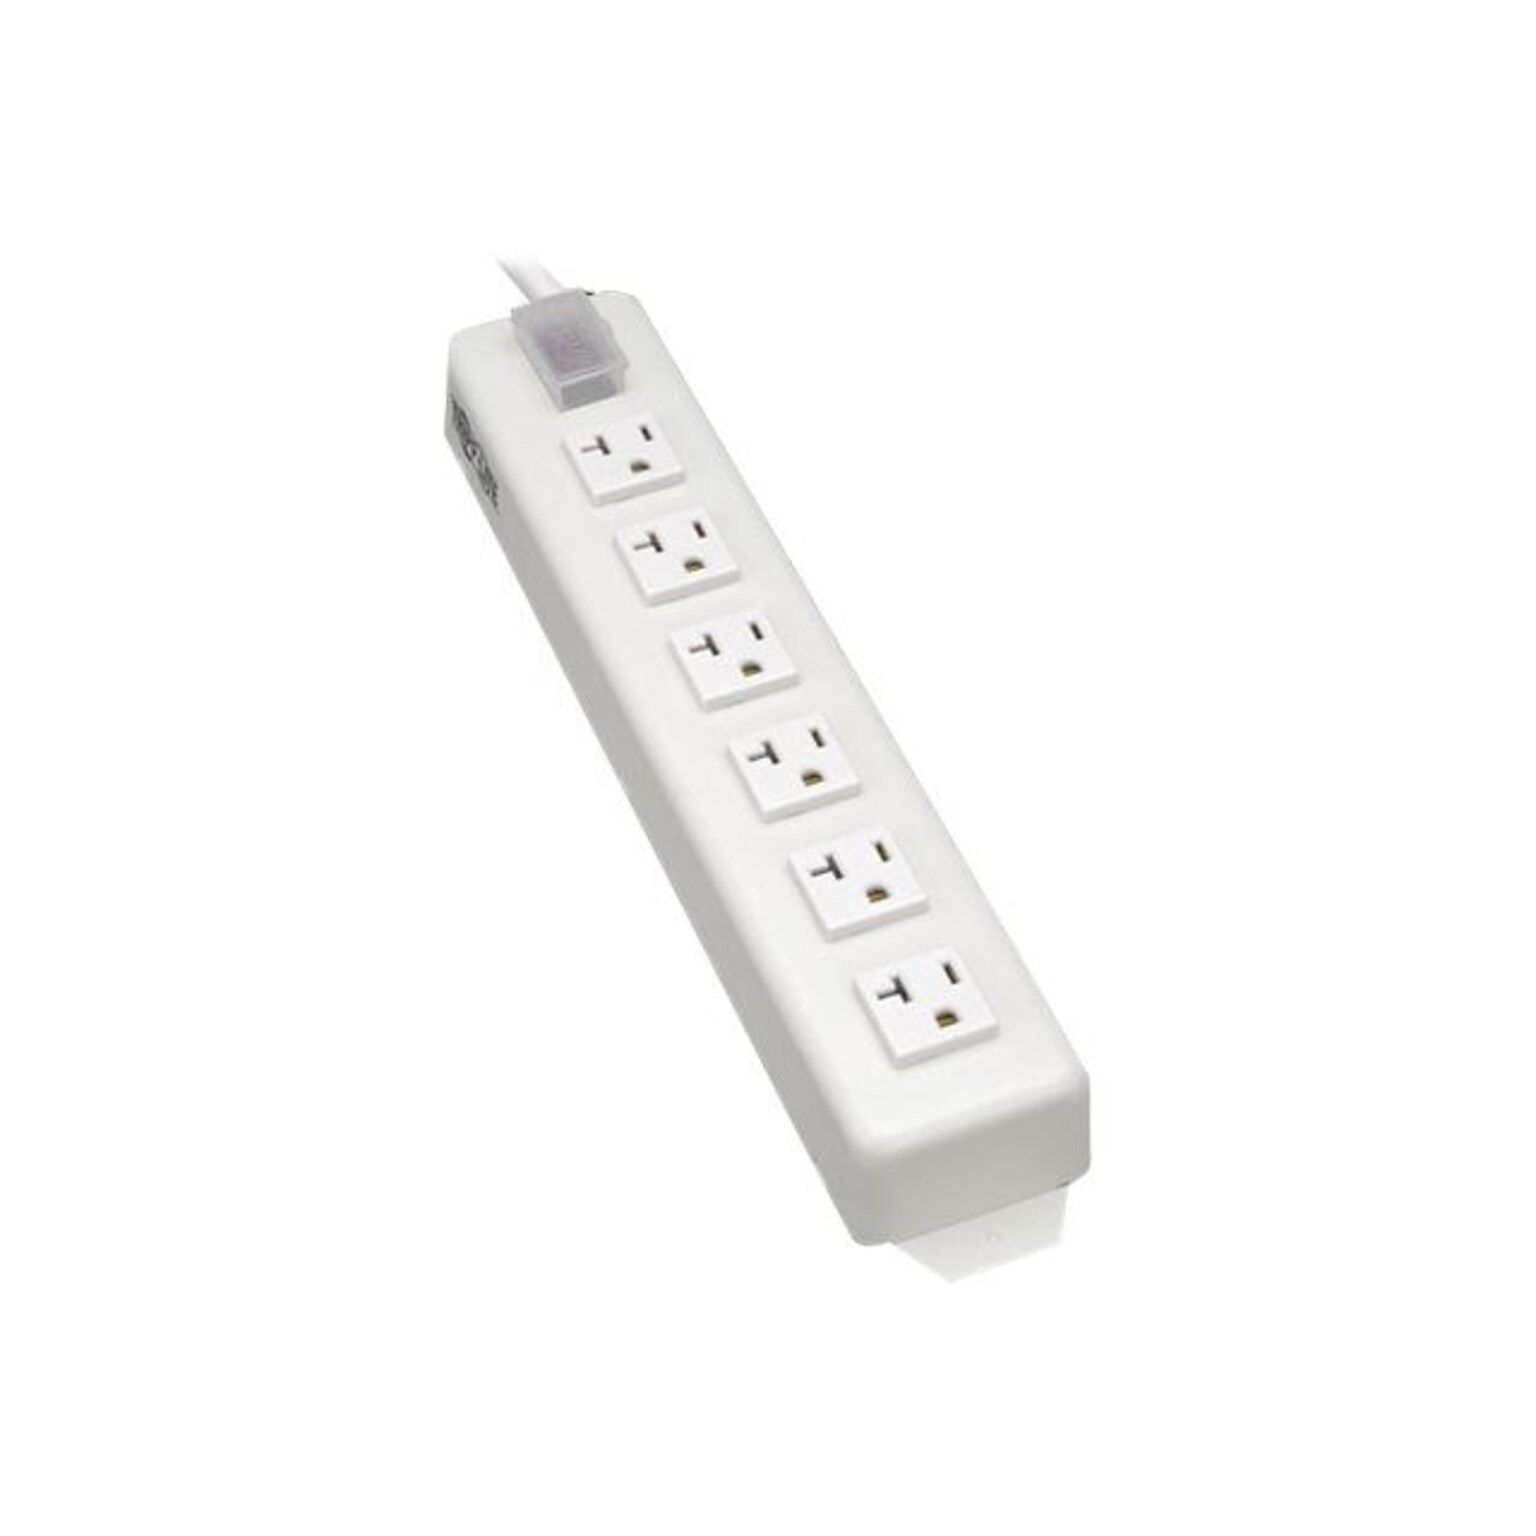 Tripp Lite Power It 6 Outlet Power Strip With 15 Cord